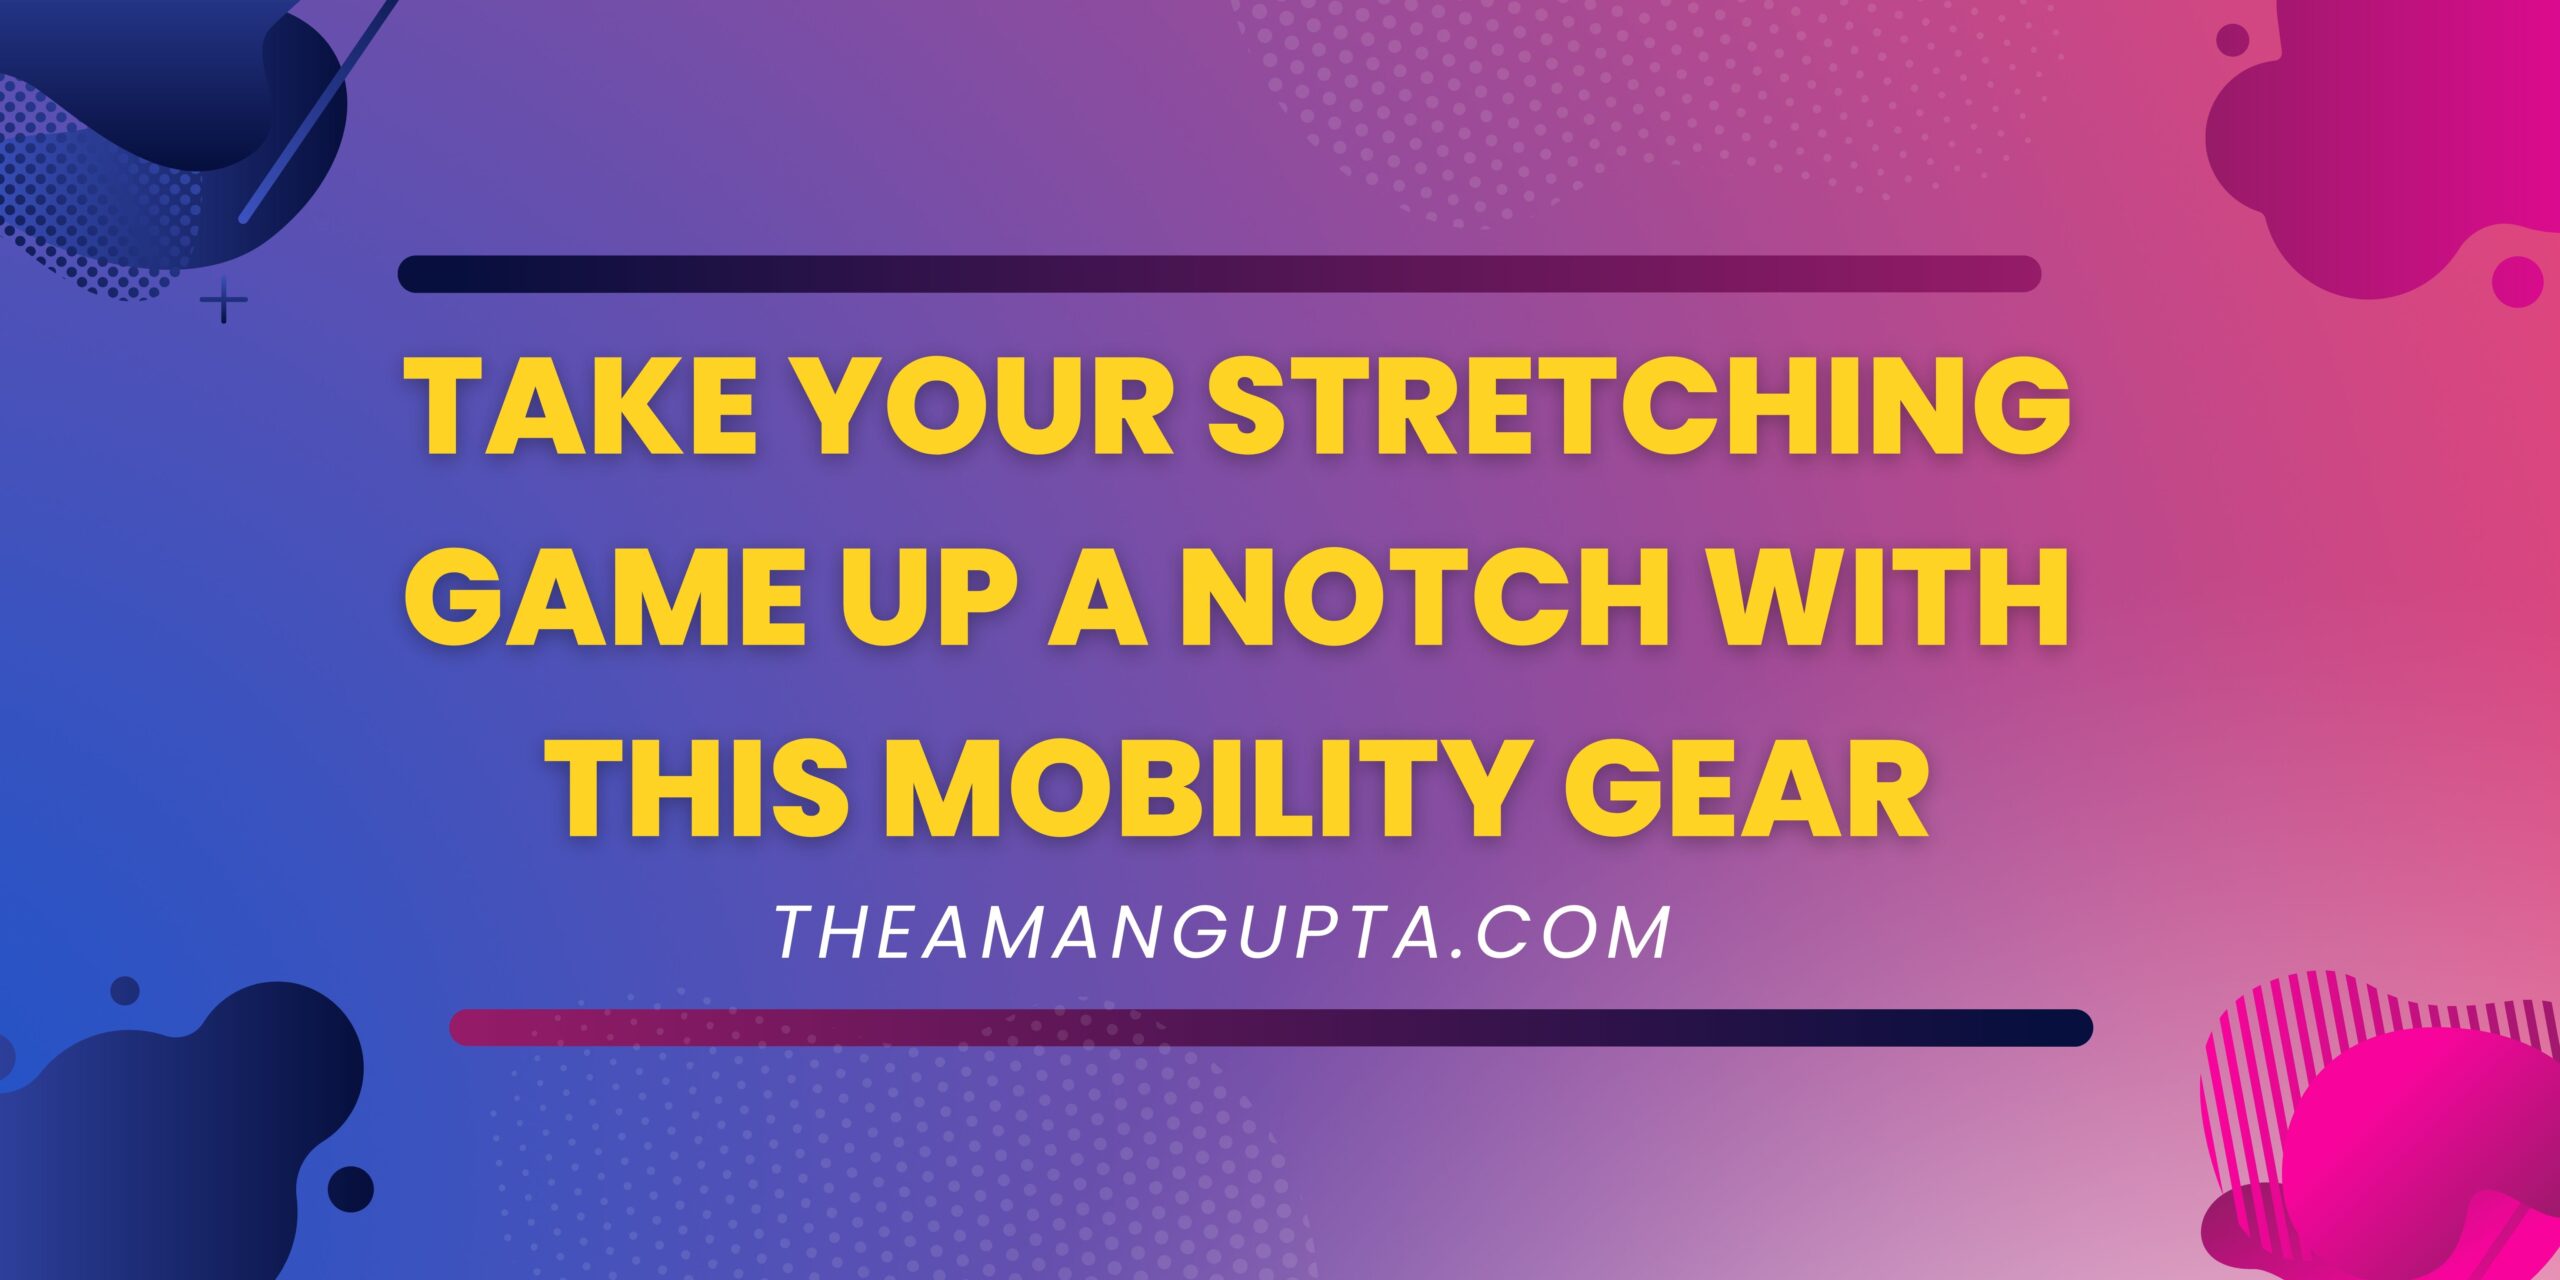 Take Your Stretching Game Up a Notch with This Mobility Gear|Mobility Gear|Theamangupta|Theamangupta